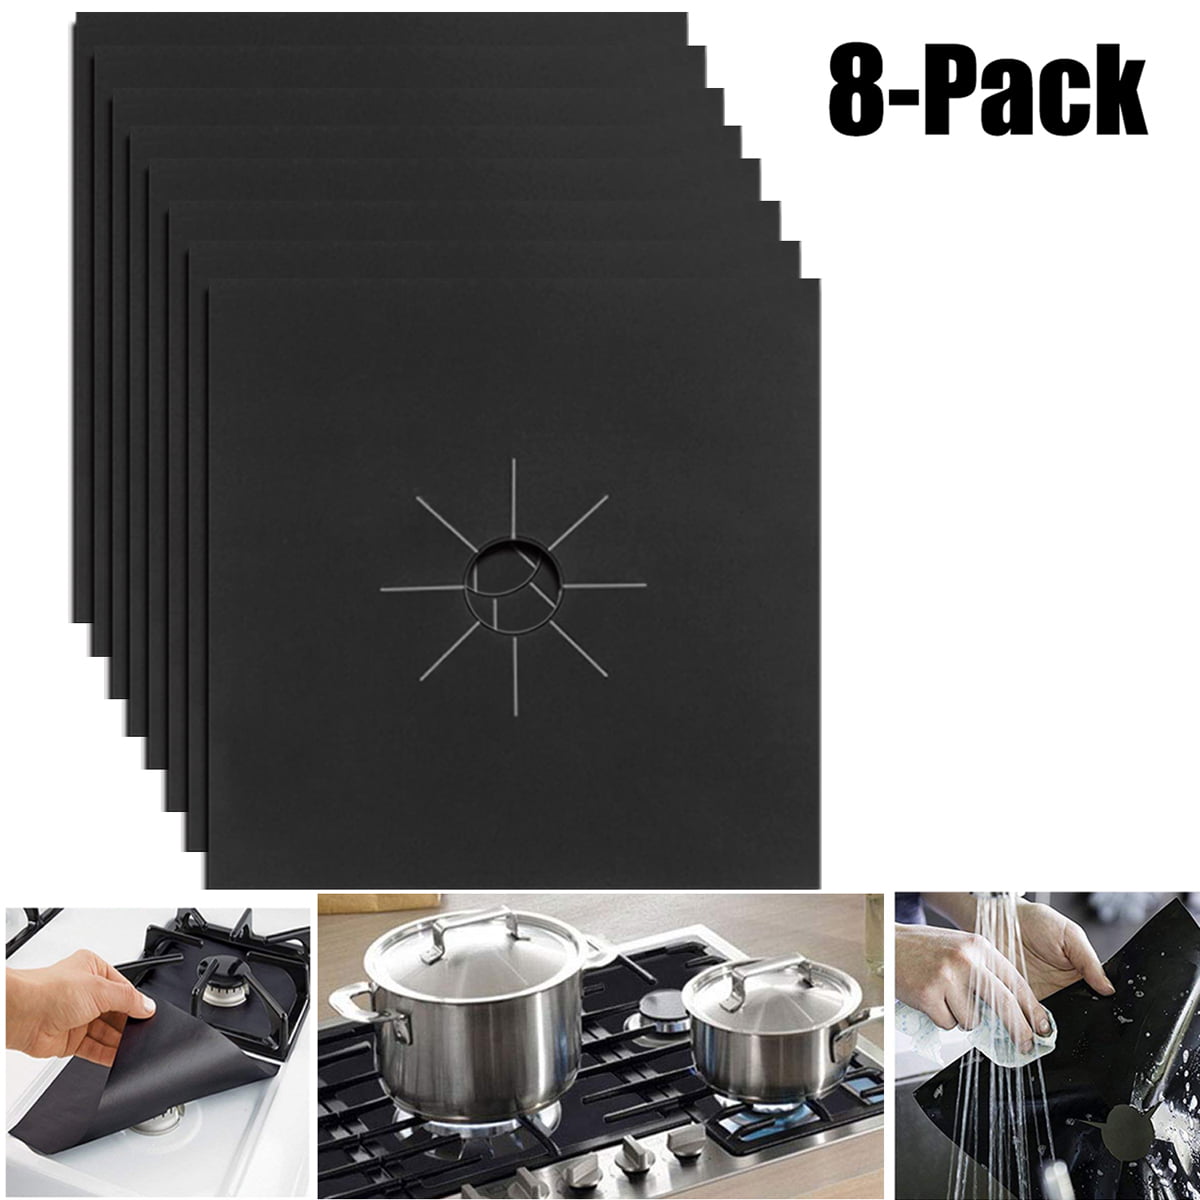 Kitchen Friendly Cooking Accessory R2 4 Pack Reusable Gas Range Protectors Heat Resistant Fiberglass Mat with Adjustable Size Non-Stick & Easy to Clean Thick Safest On The Market